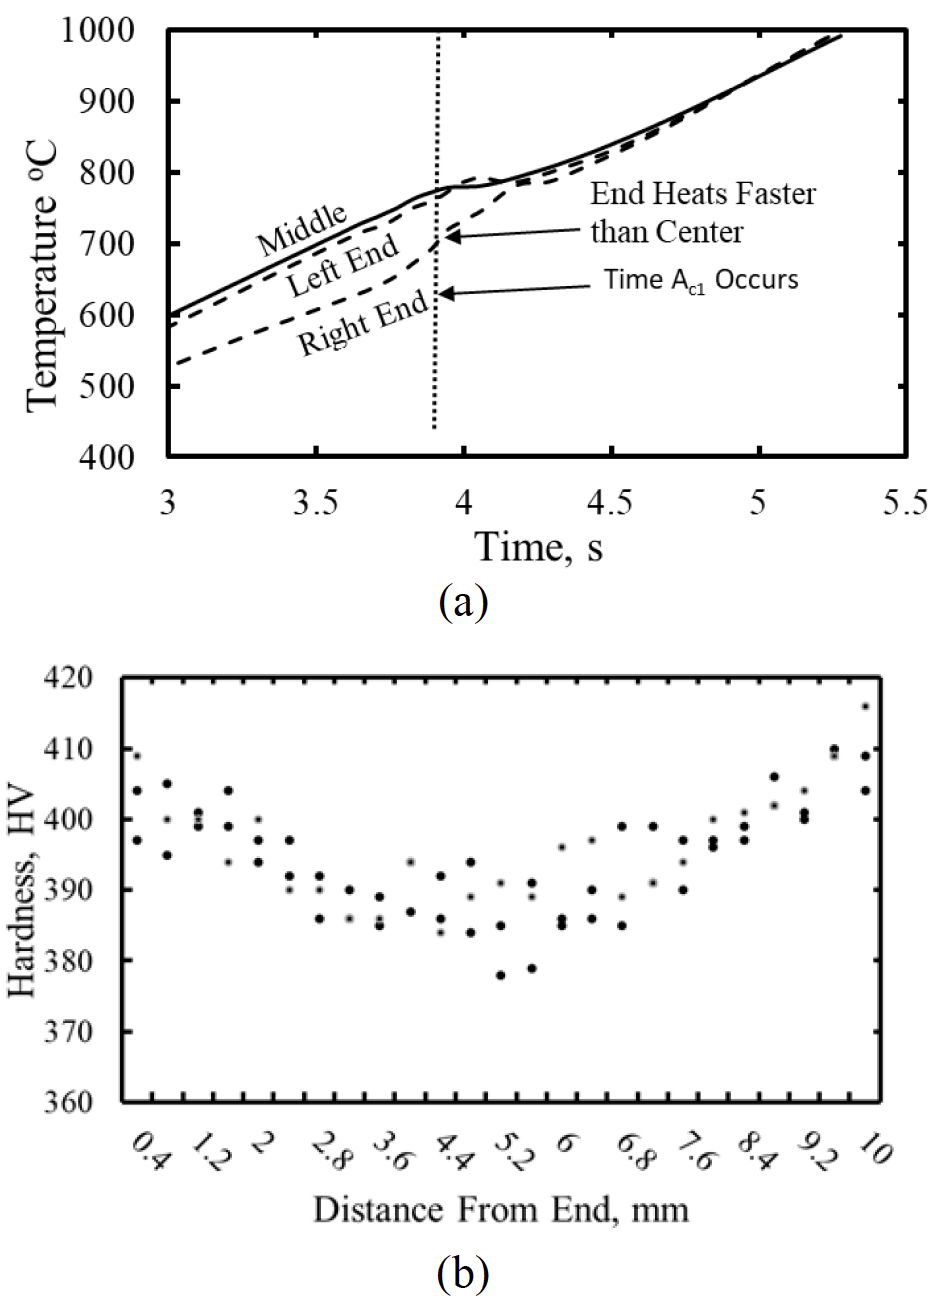 Fluxtrol | ASM HTS 2021 Influence of Specimen Design on Maximum Heating Rate and Temperature Variation During Induction Heating in an 805L Dilatometer Figure 6 - Temperature gradients during heating 4 mm diameter by 10 mm long cylinder of 1045 steel at 200 °C·s<sup>-1</sup> from delayed heating at the ends as shown in (a) thermocouple readings at specimen ends versus center and (b) higher hardness at ends of quenched martensitic specimen heated to 740 °C at the center.